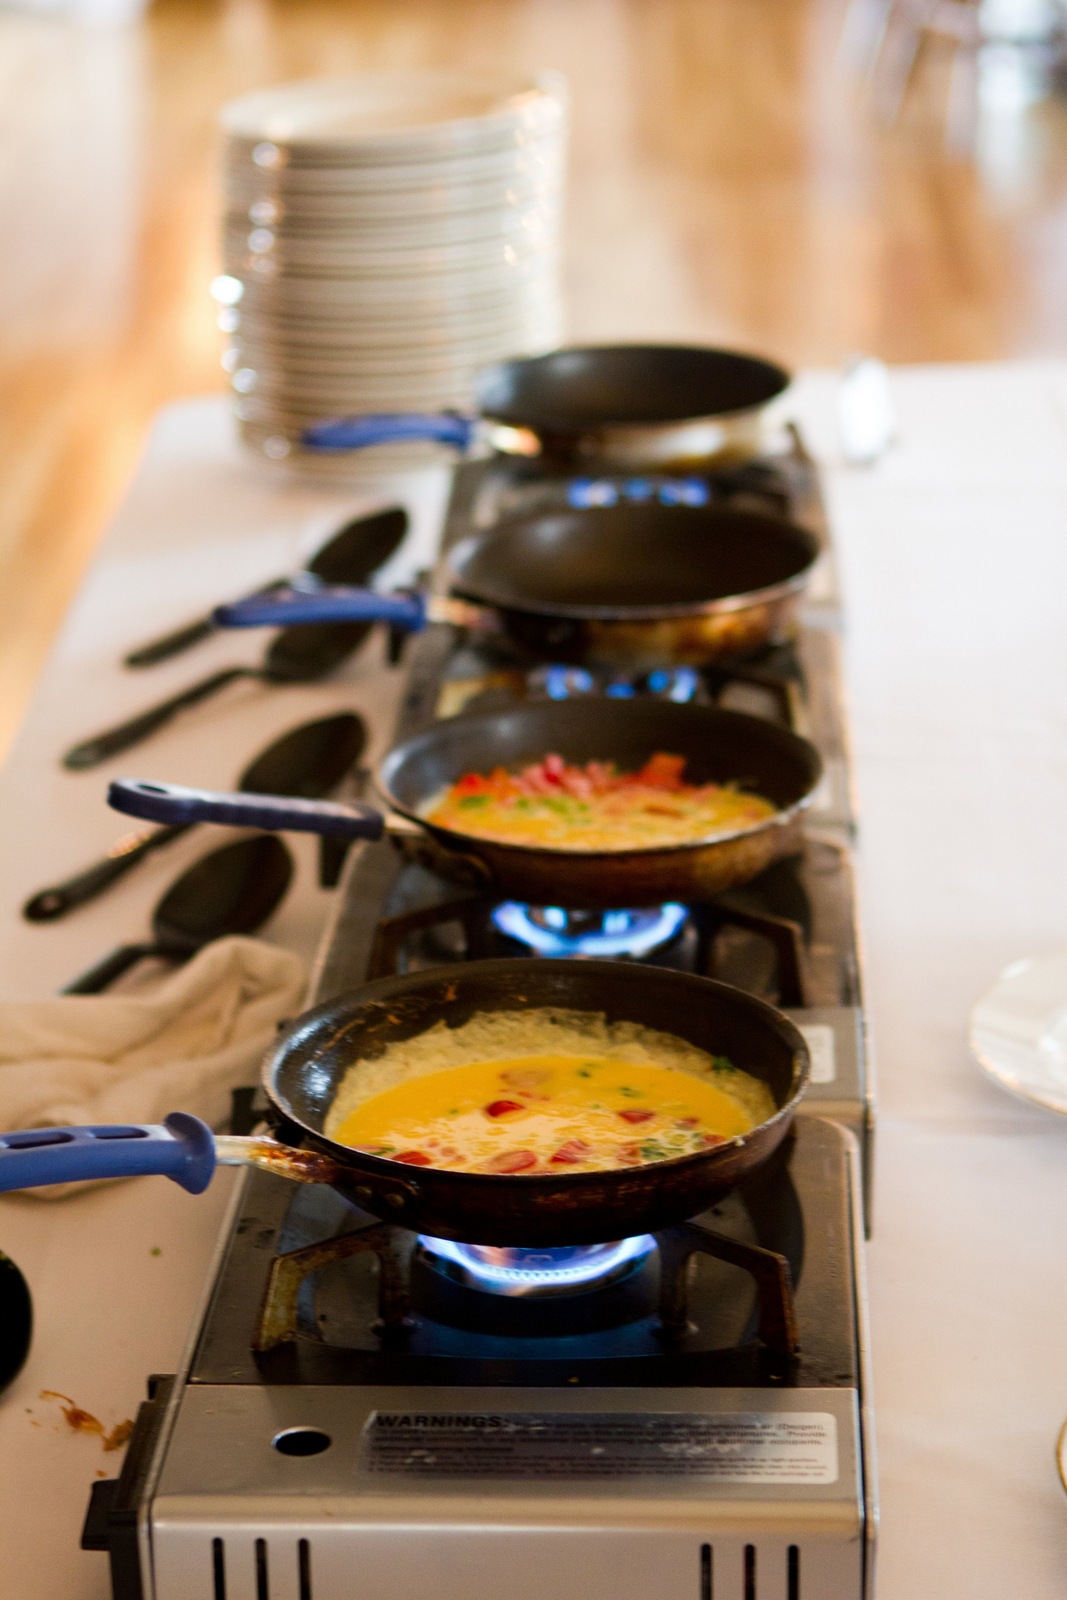 Wedding Brunch Reception - Omelette Station - Photo Courtesy of Brian Samuels Photography